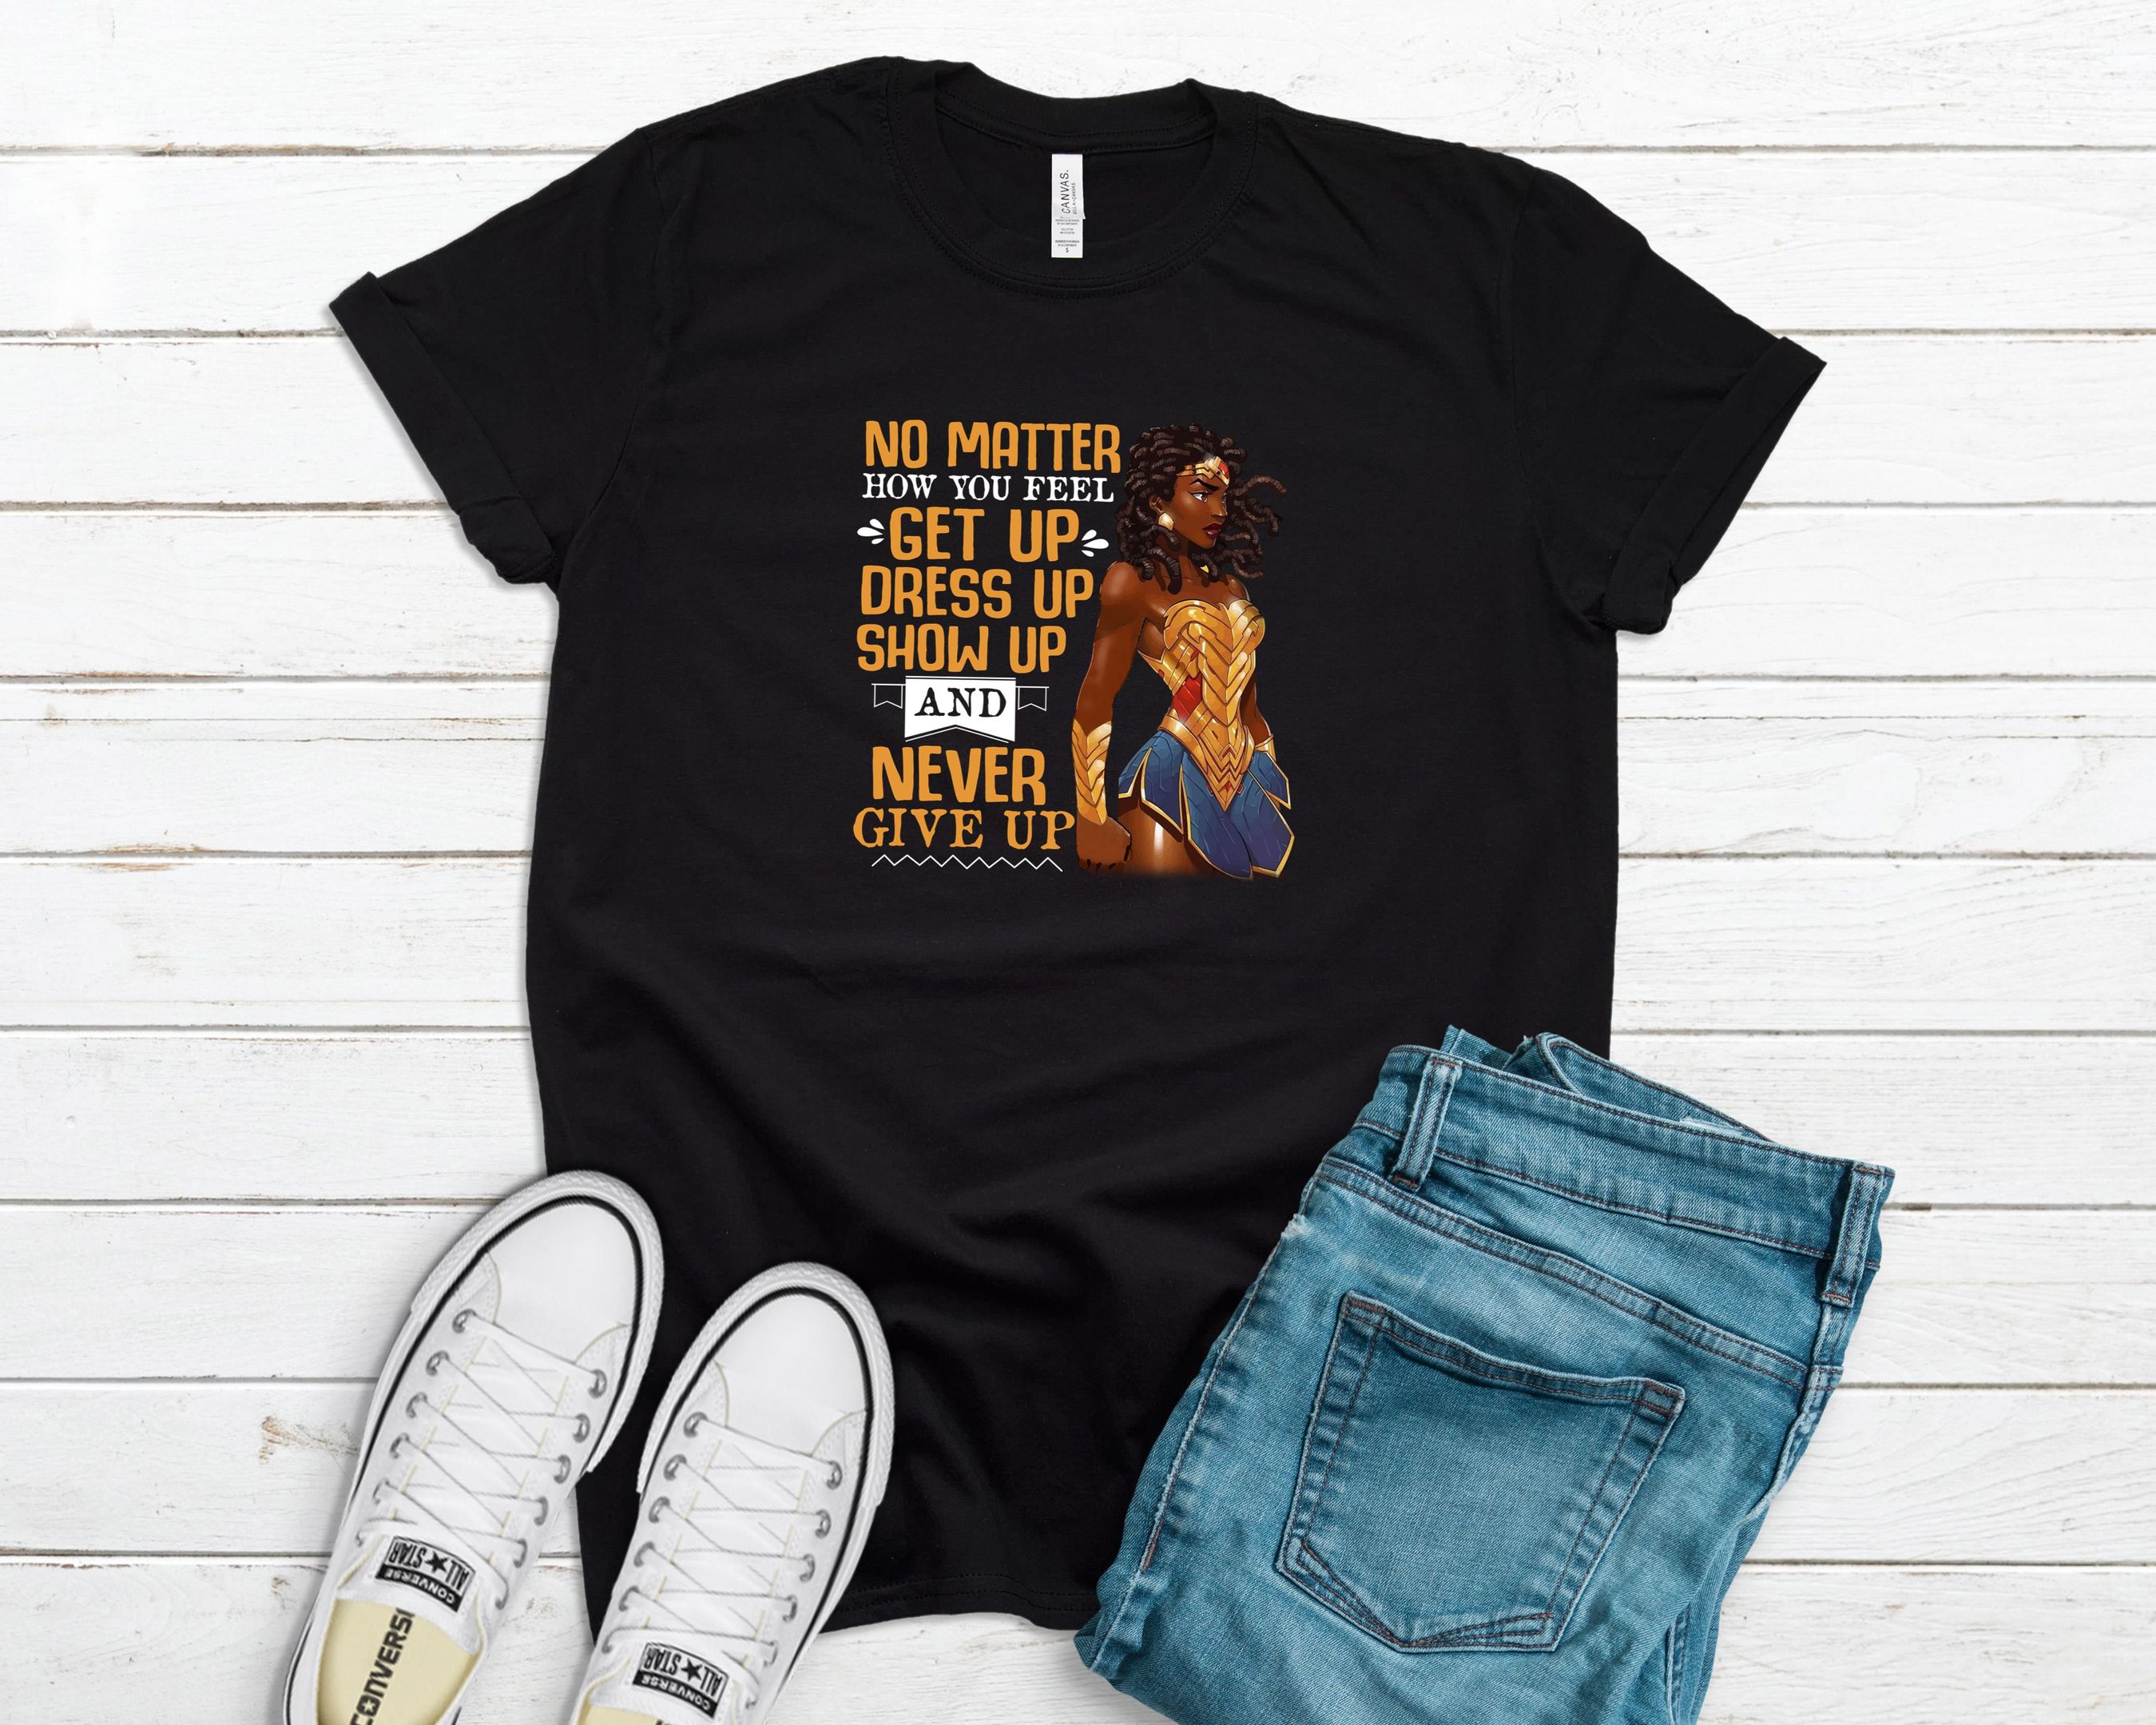 No Matter How You Feel Get Up Dress Up Show Up And Never Give Up Shirt, Locs Girl Shirt